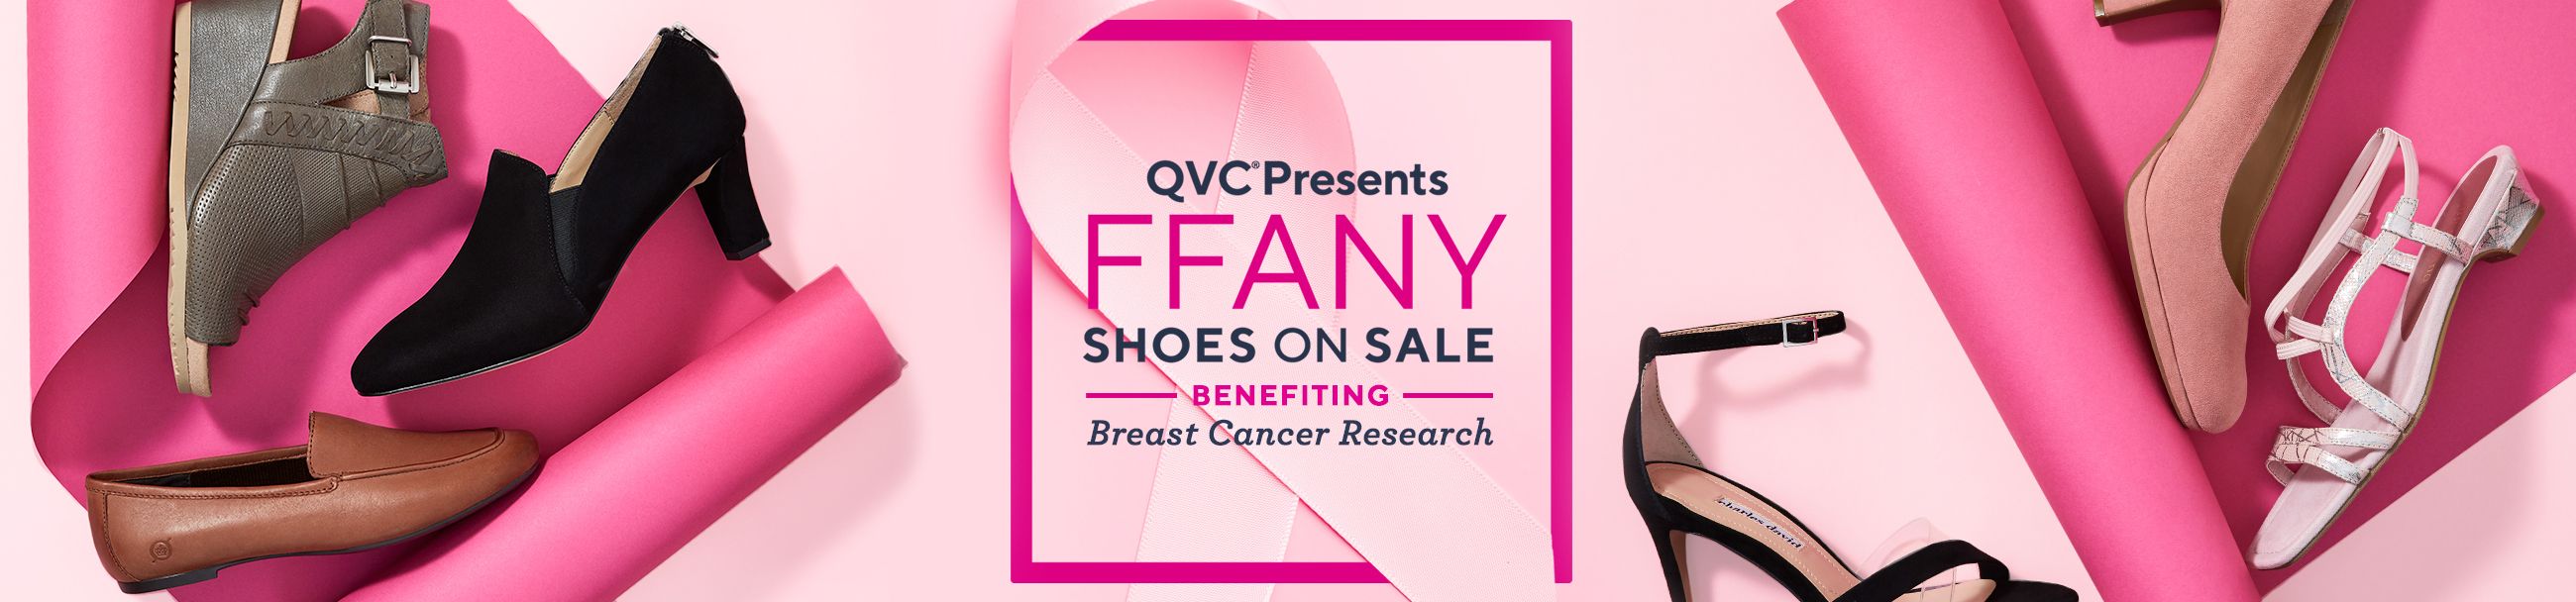 QVC® Presents the 28th Annual “FFANY Shoes on Sale”   